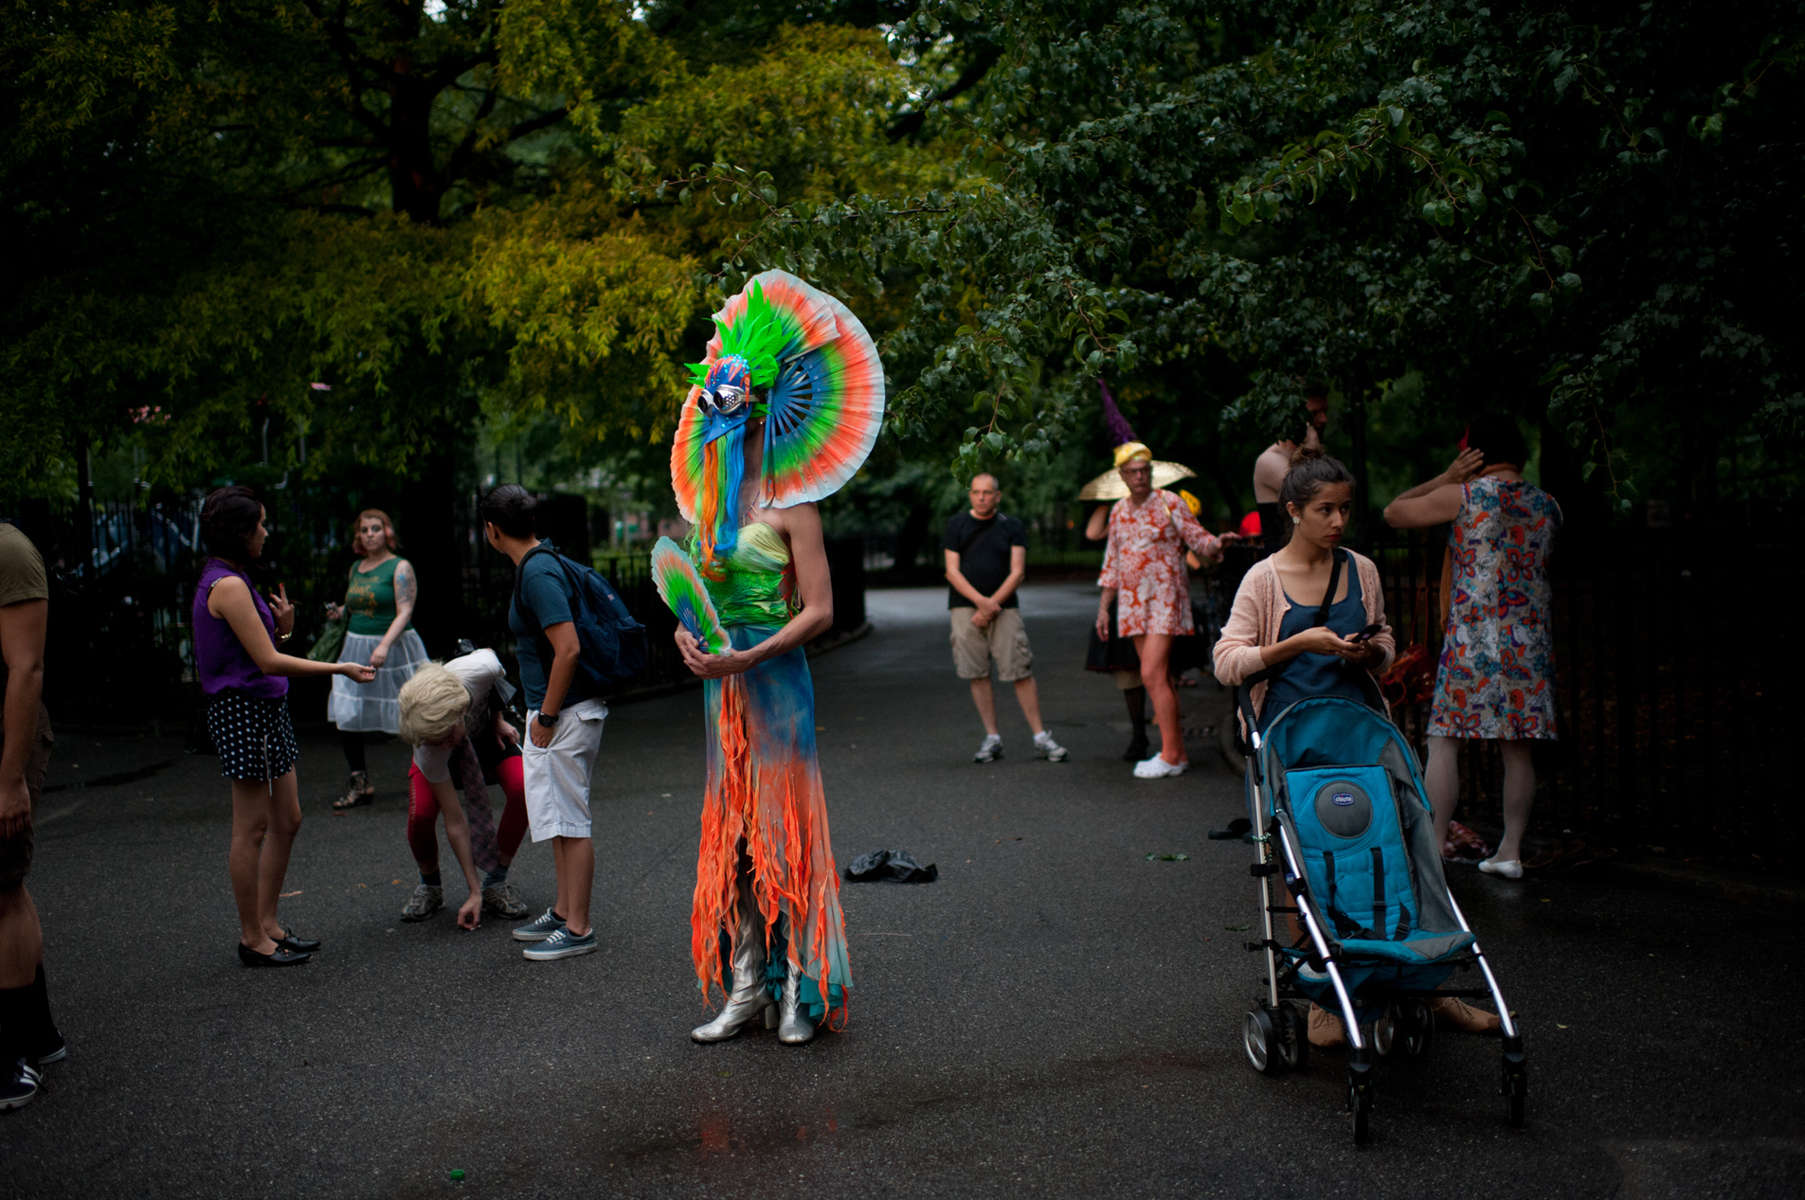 Friends congregate at Tompkins Square Park in the East Village in festive attire before heading to the Stonewall Inn in the West Village during the New York City Drag March.